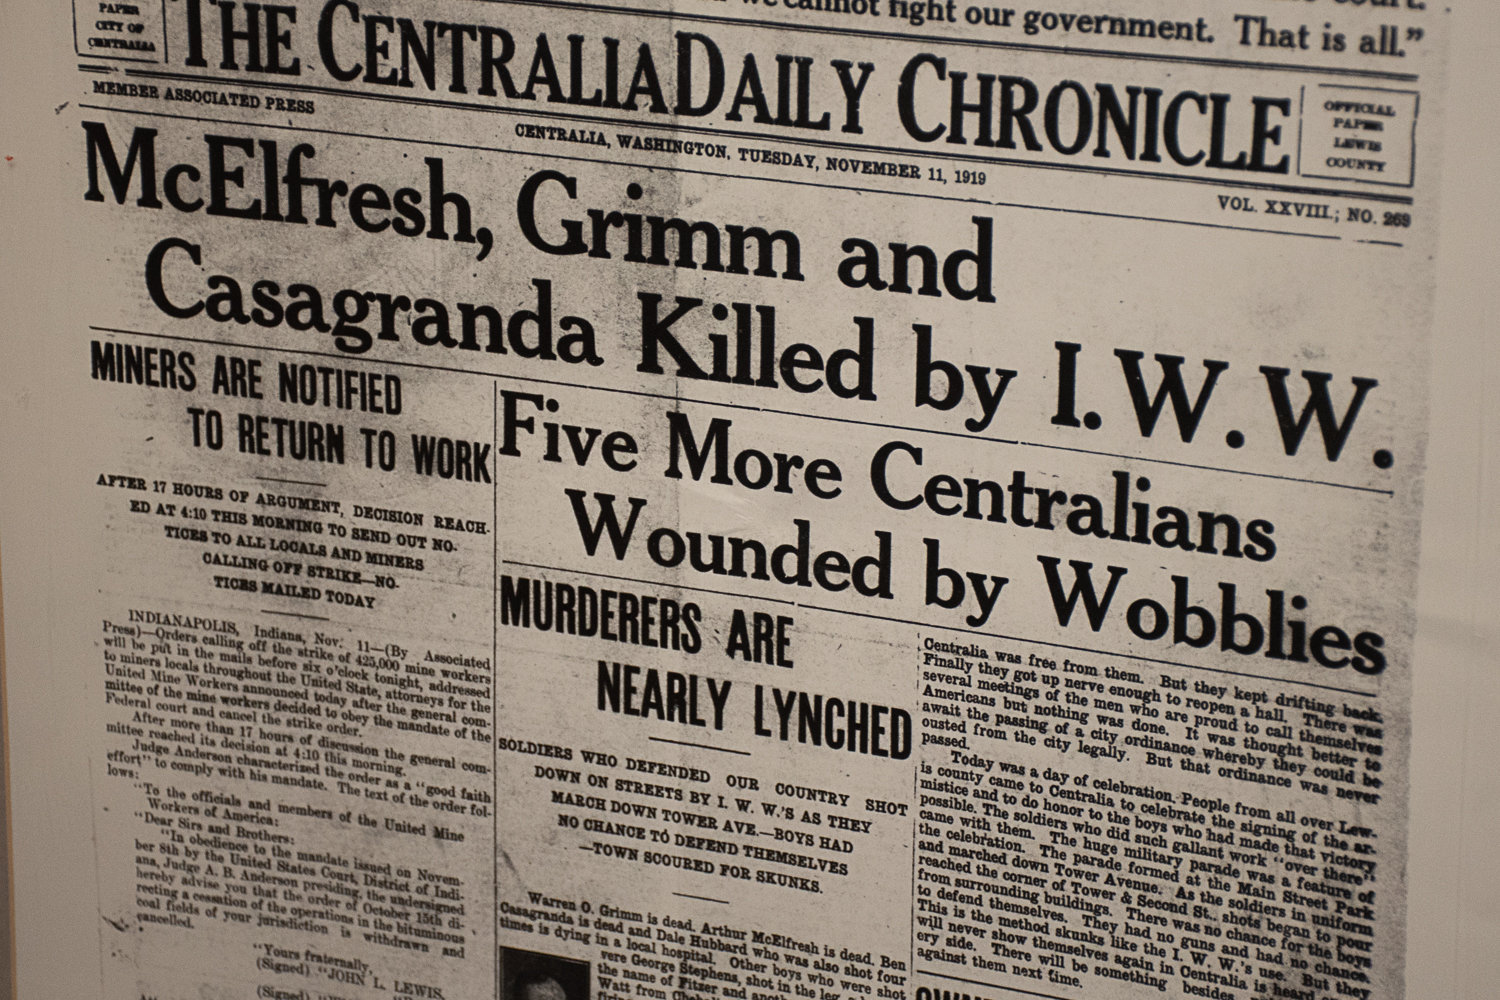 The front page of The Centralia Daily Chronicle on the day of the Centralia Tragedy.